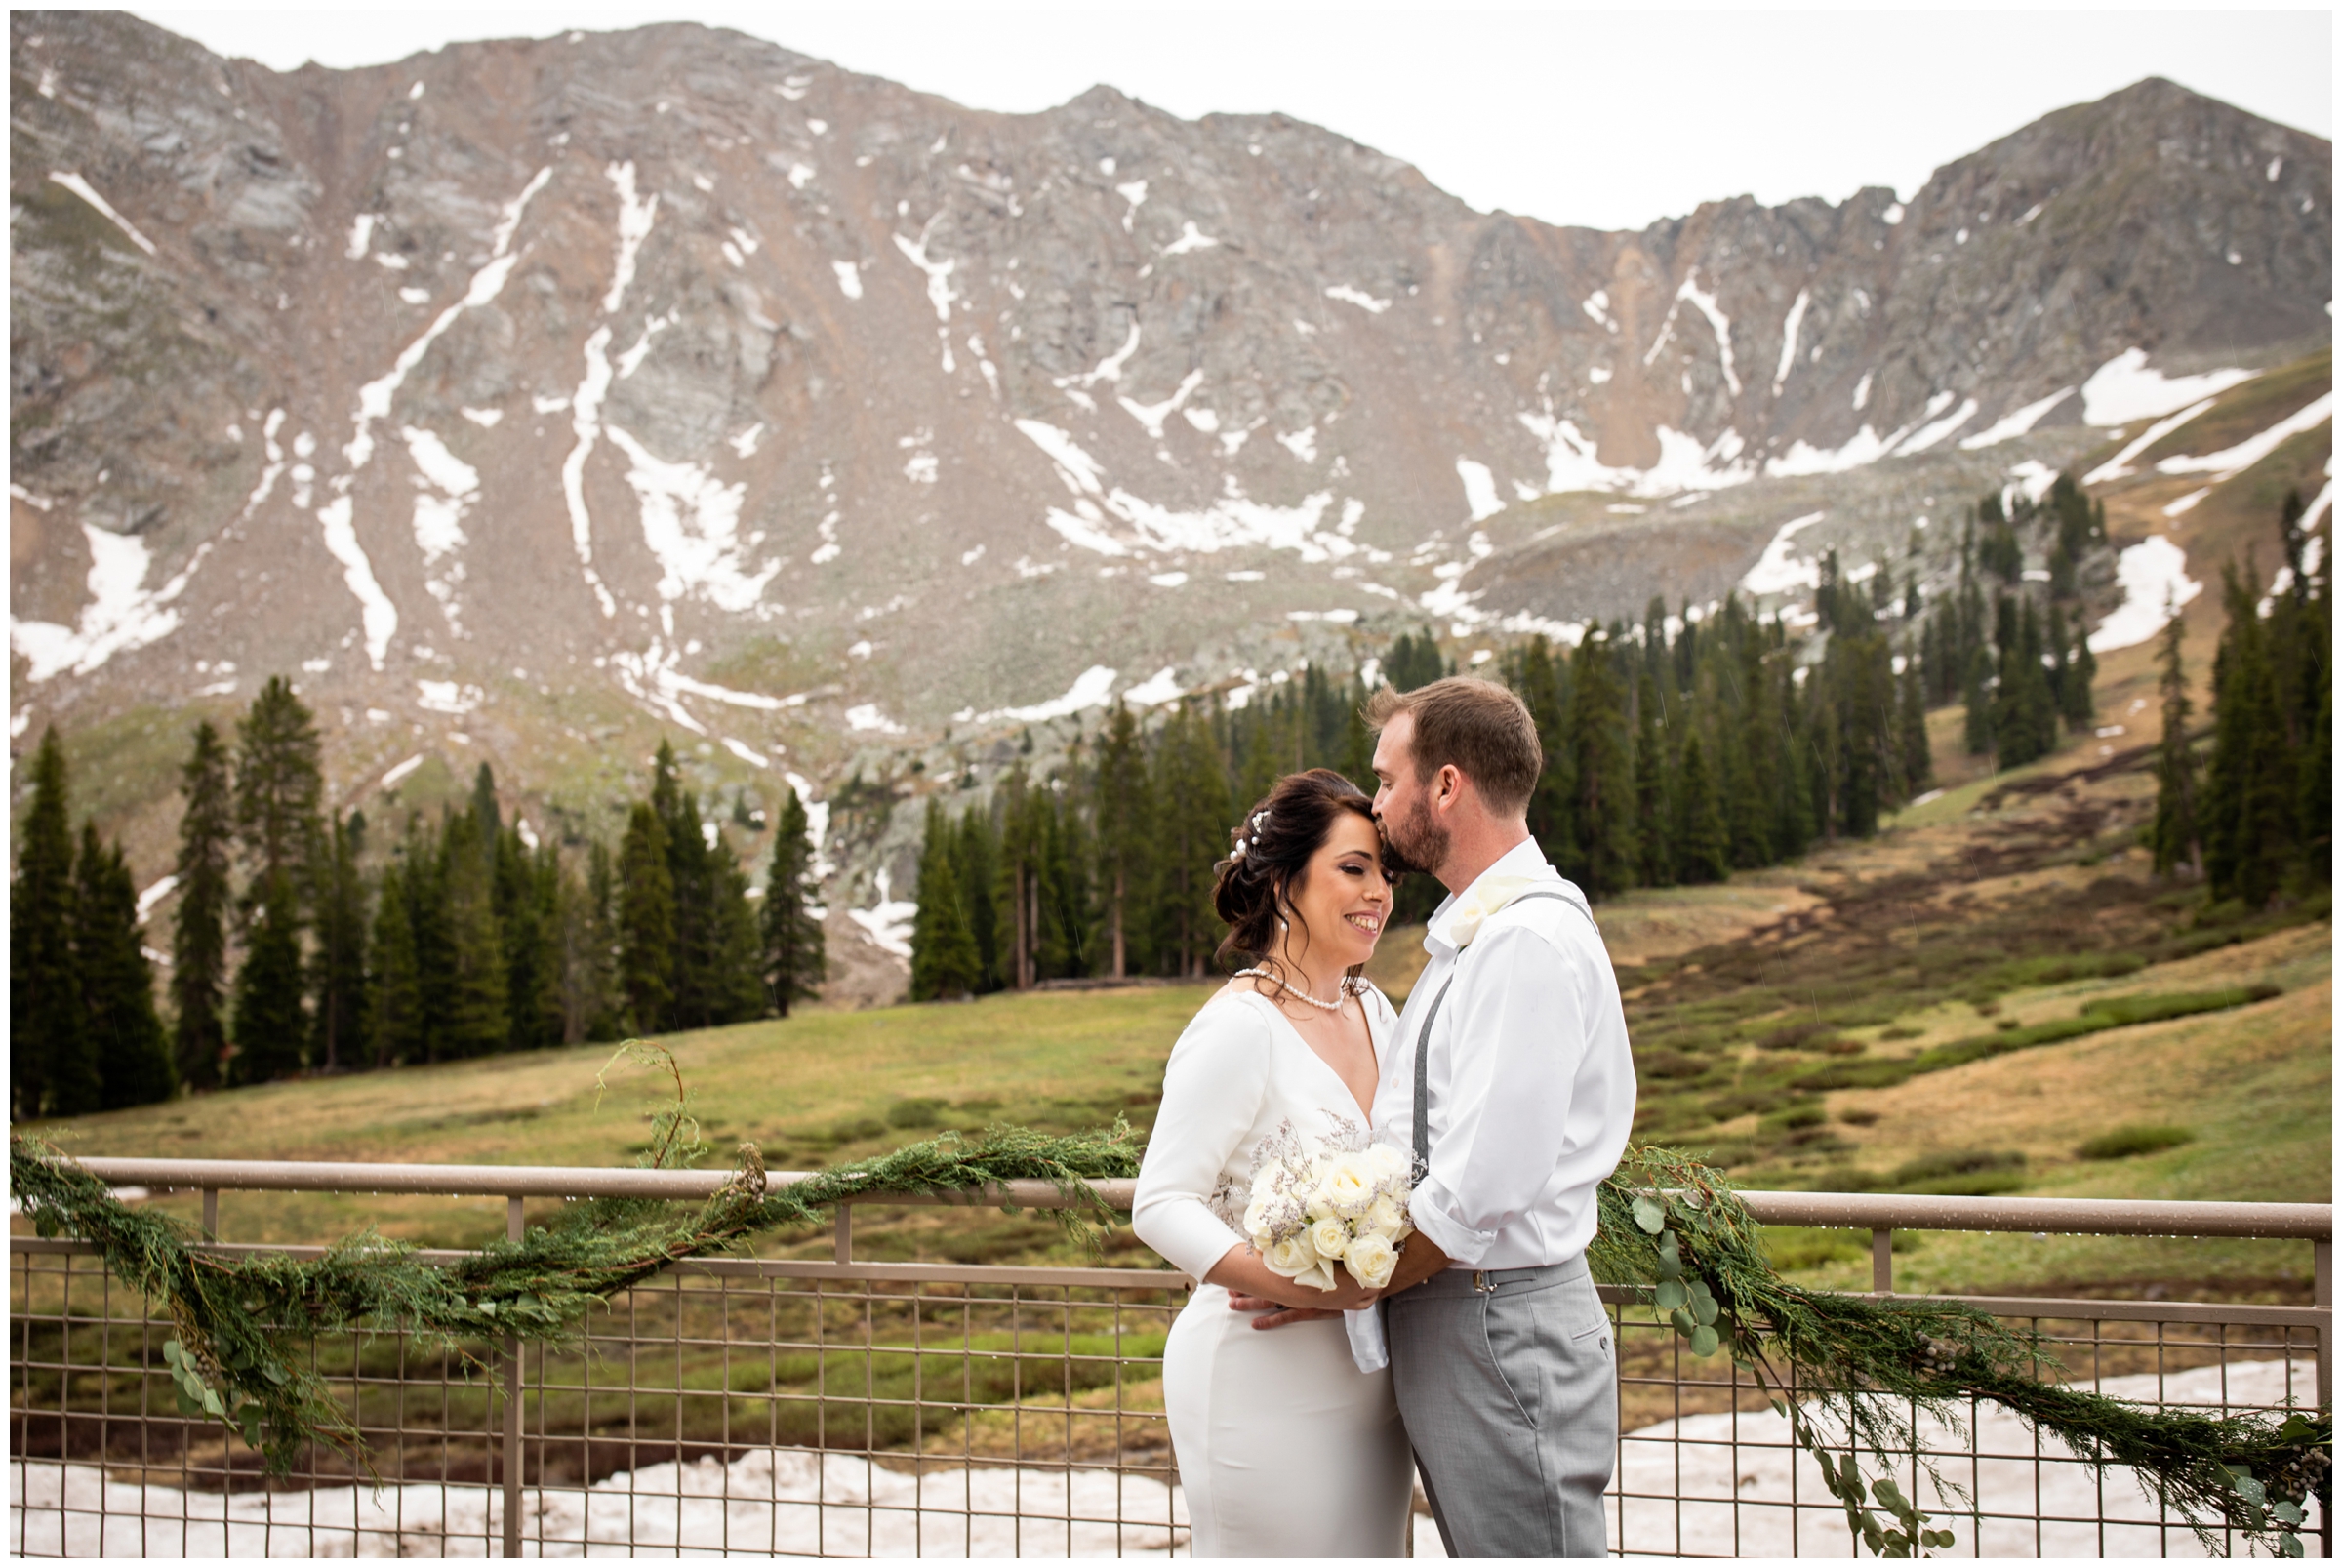 groom kissing bride's forehead during romantic wedding portraits at Arapahoe Basin in Colorado mountains 